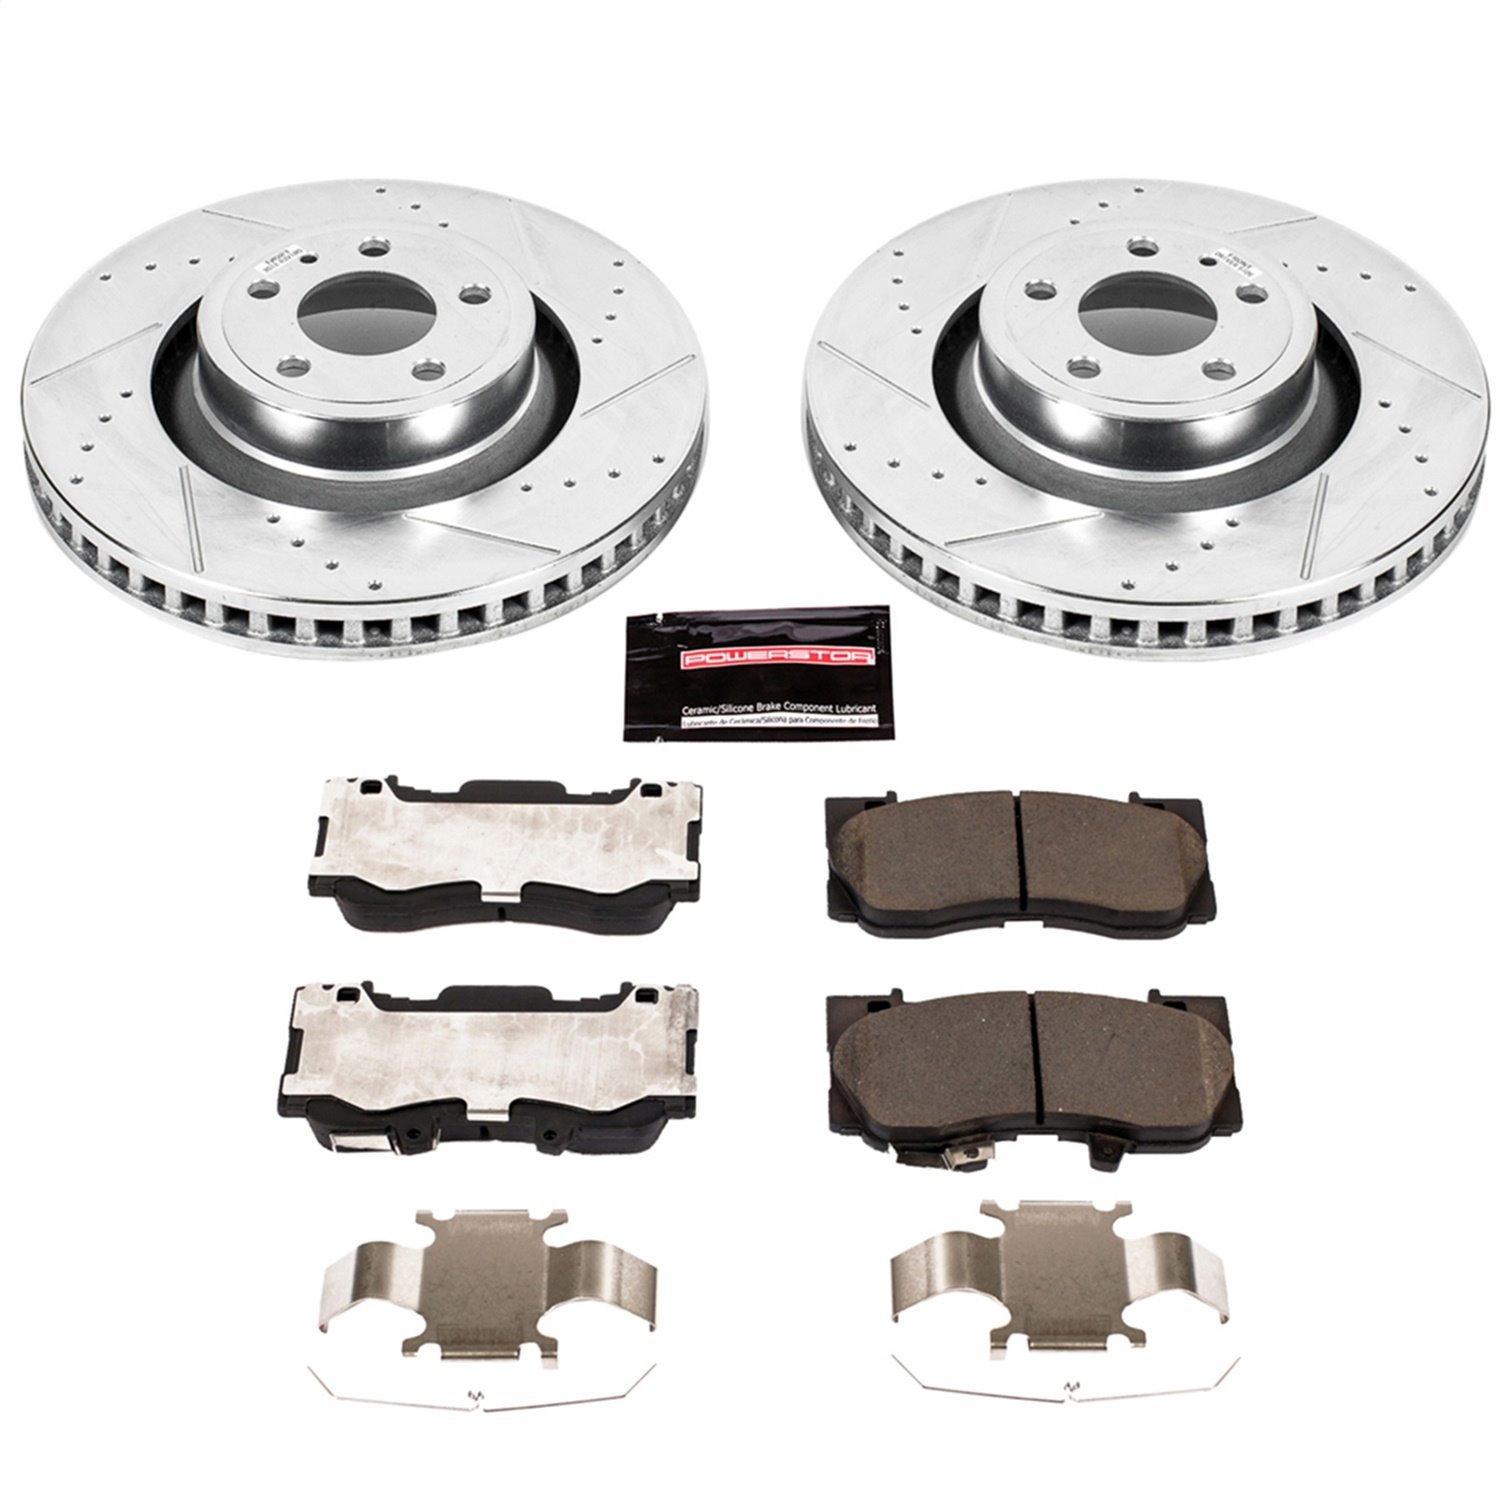 Z23 Evolution Brake Kit for 2015-2018 Ford Mustang Ecoboost and GT with 4-piston front calipers